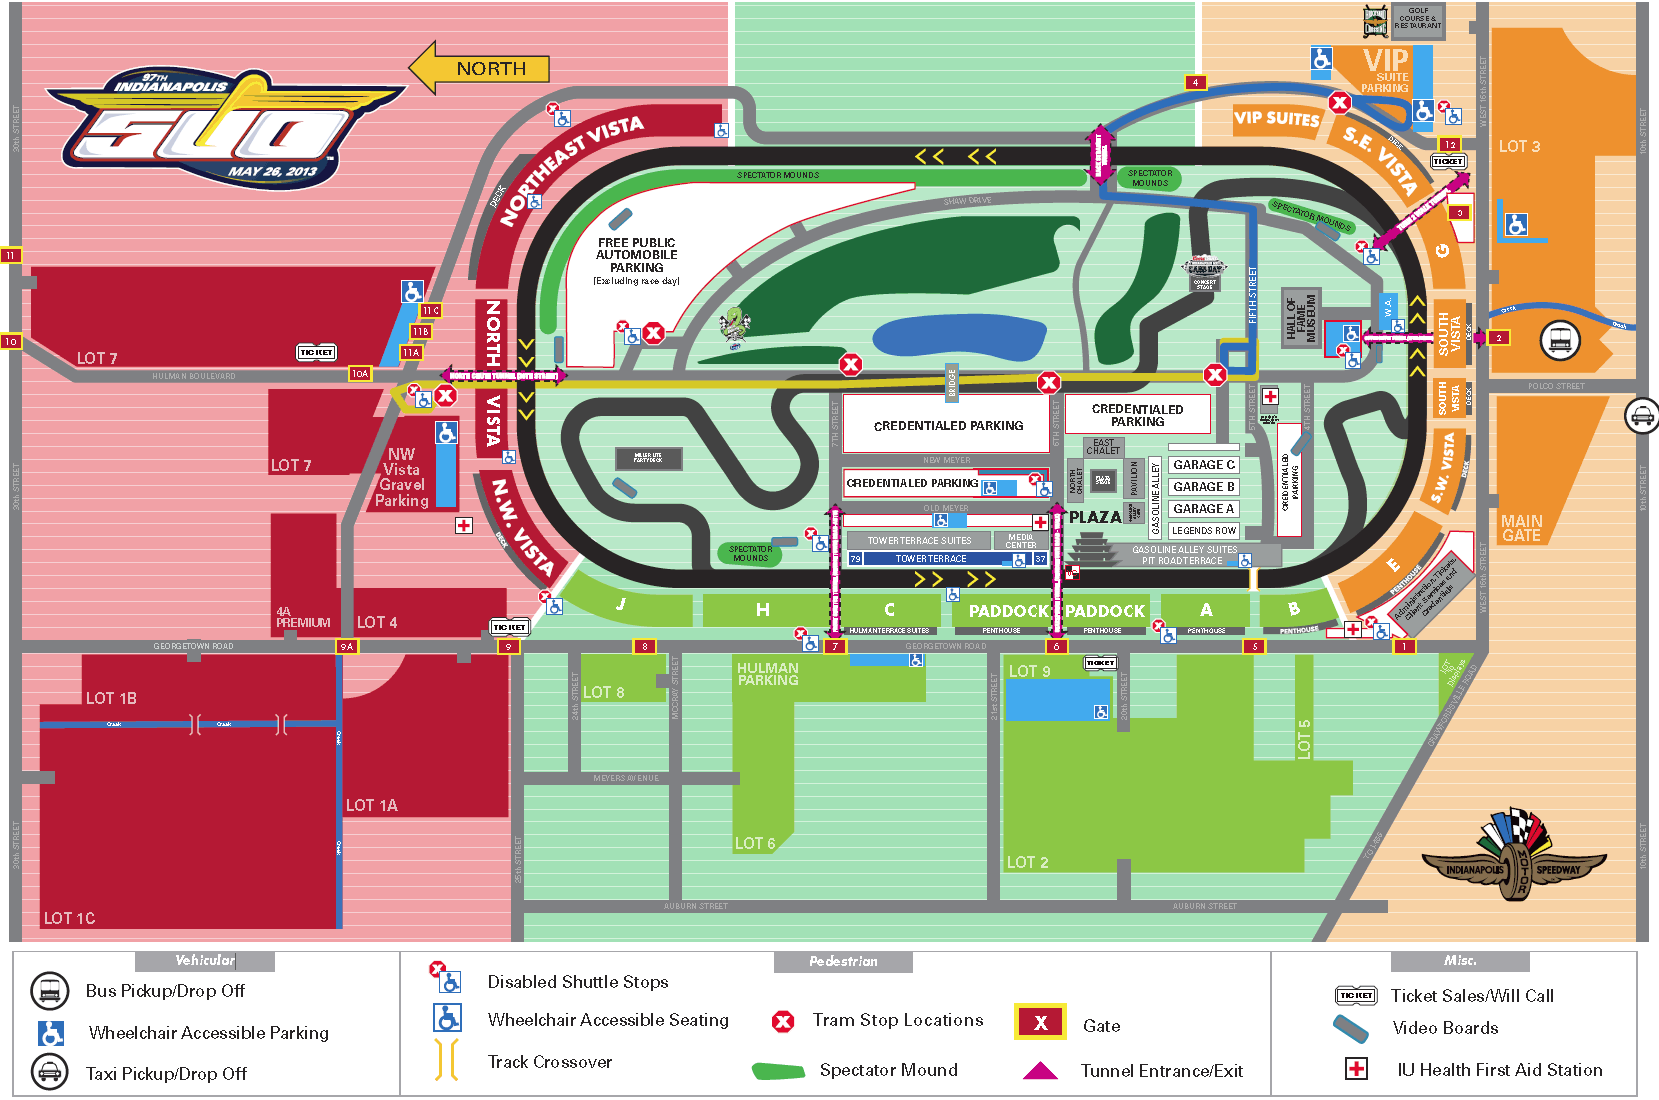 Indy 500 Seating Guide | eSeats.com